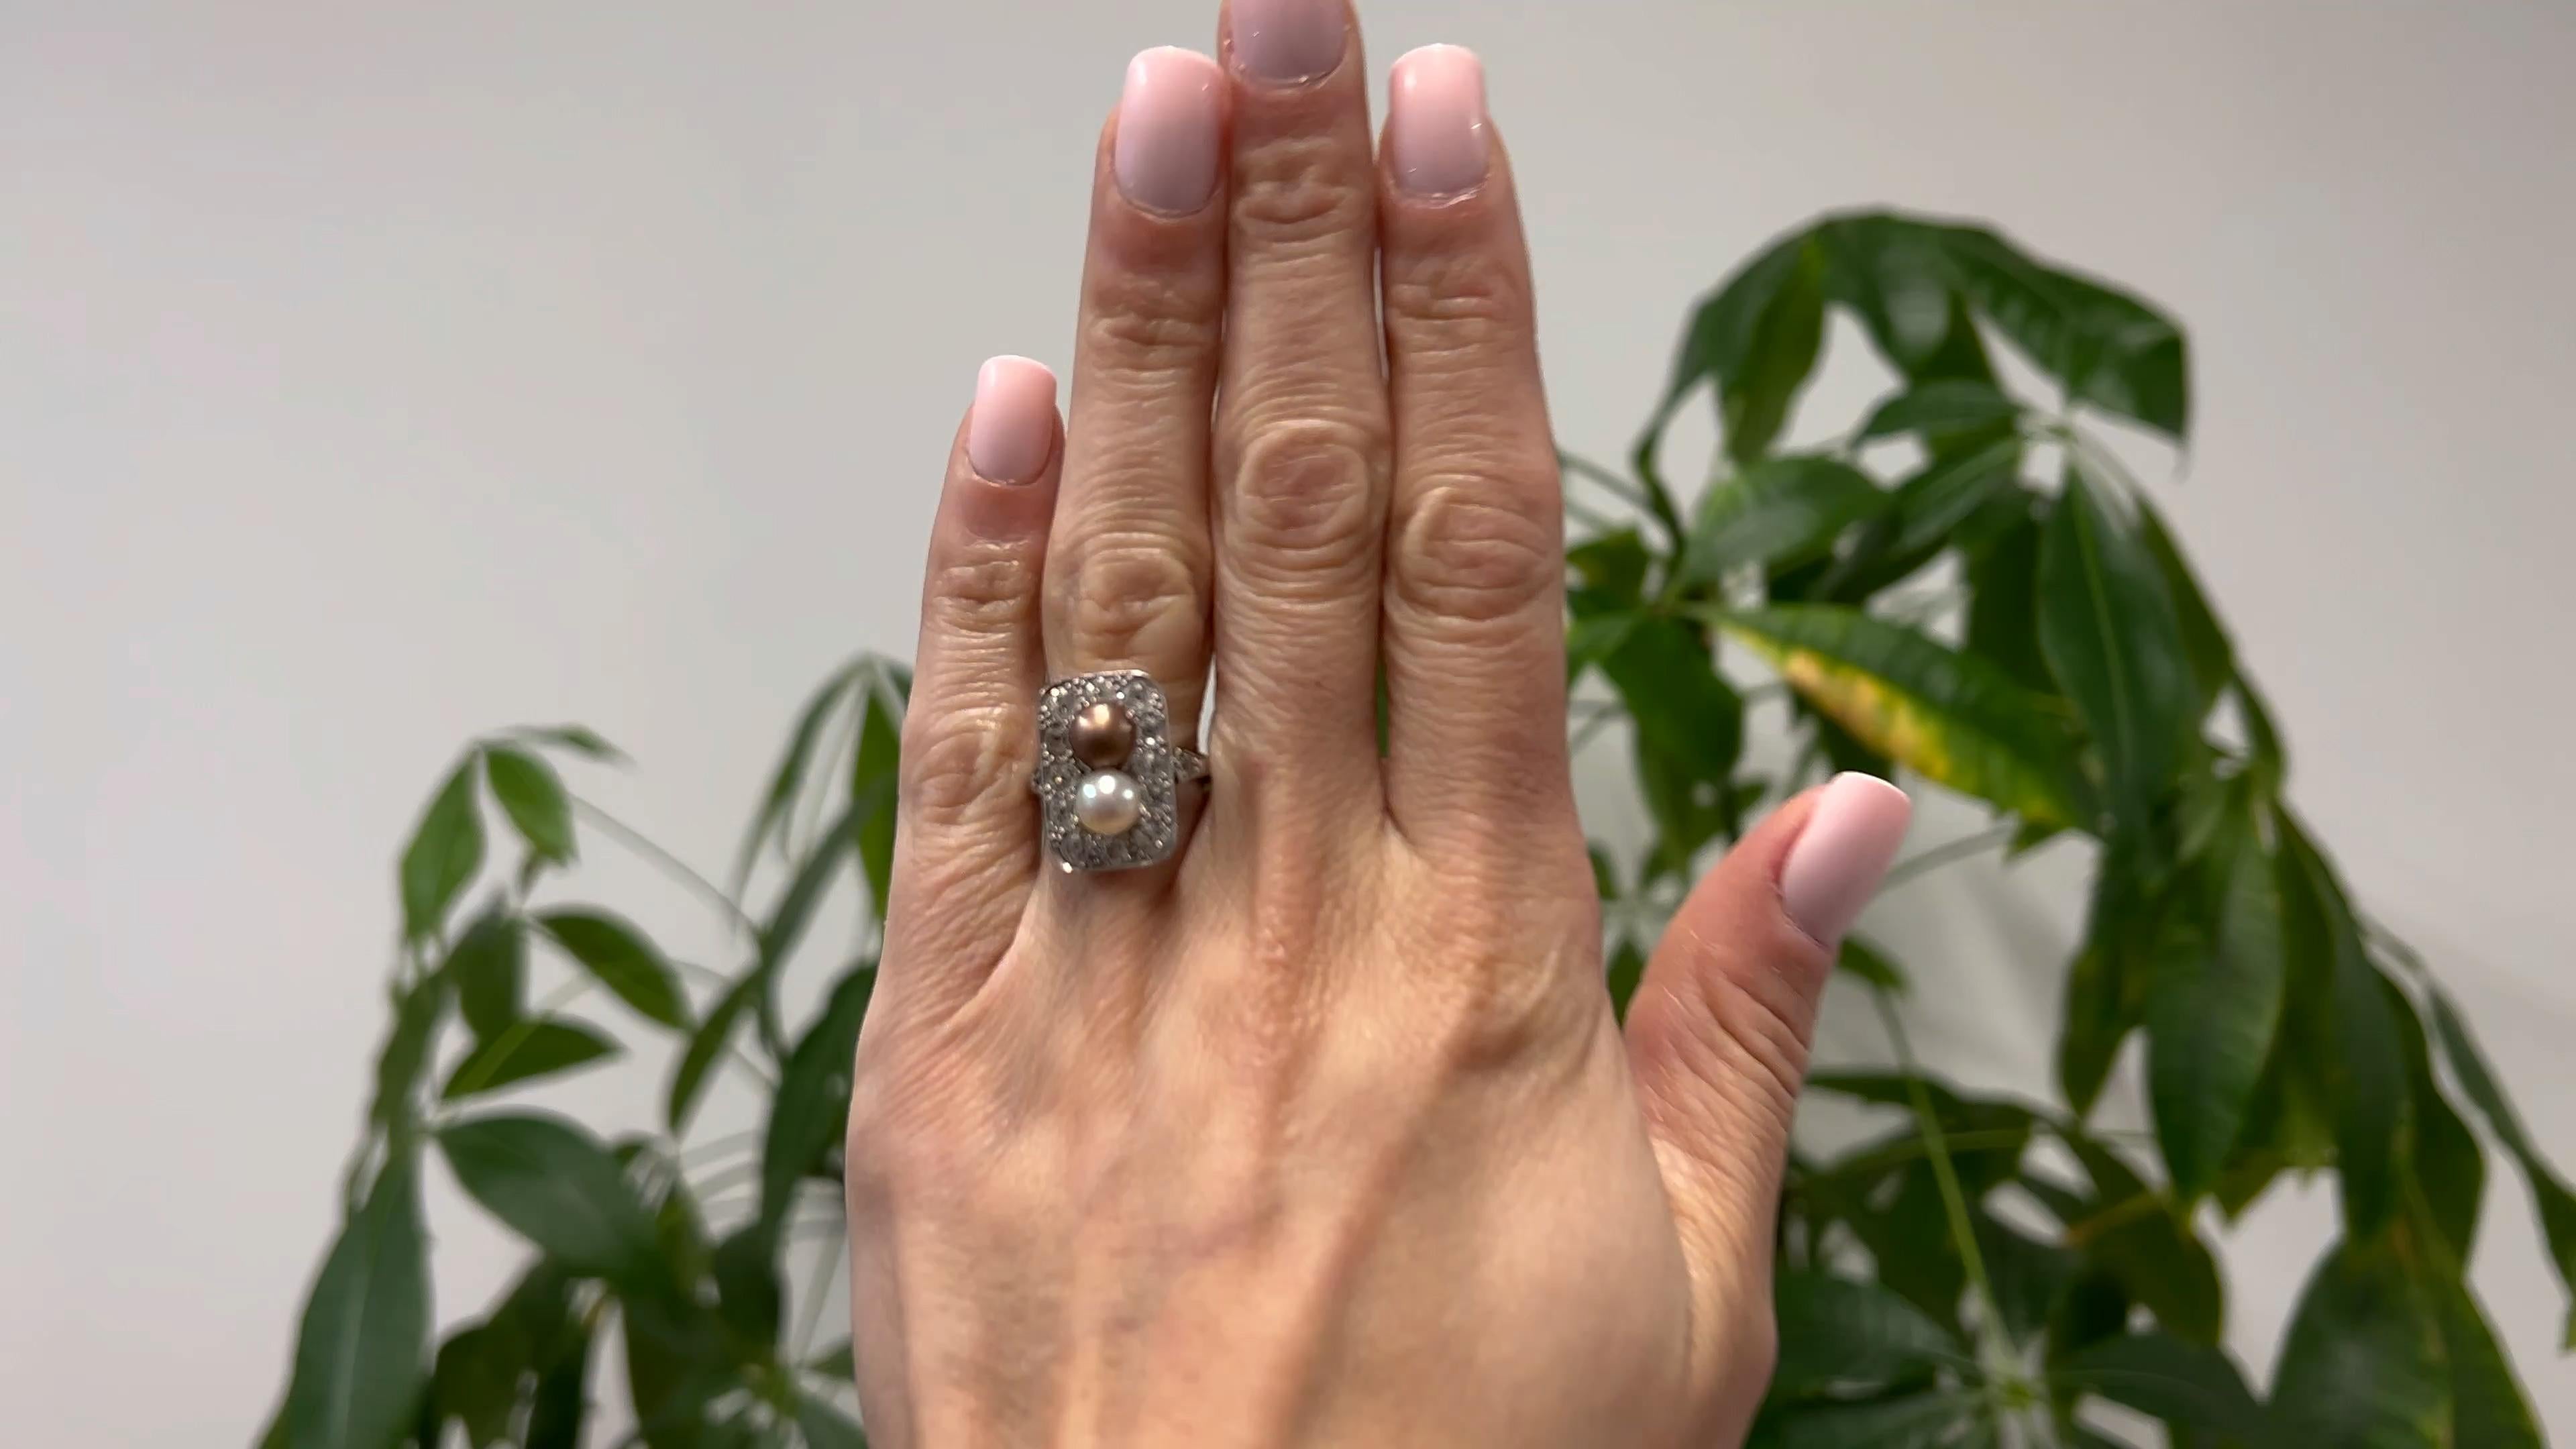 One Edwardian Pearl and Diamond Platinum Ring. Featuring one cream and one brown pearl. Accented by 14 old mine cut diamonds with a total weight of approximately 2.00 carats, graded near-colorless, SI clarity. Crafted in platinum. Circa 1910. The